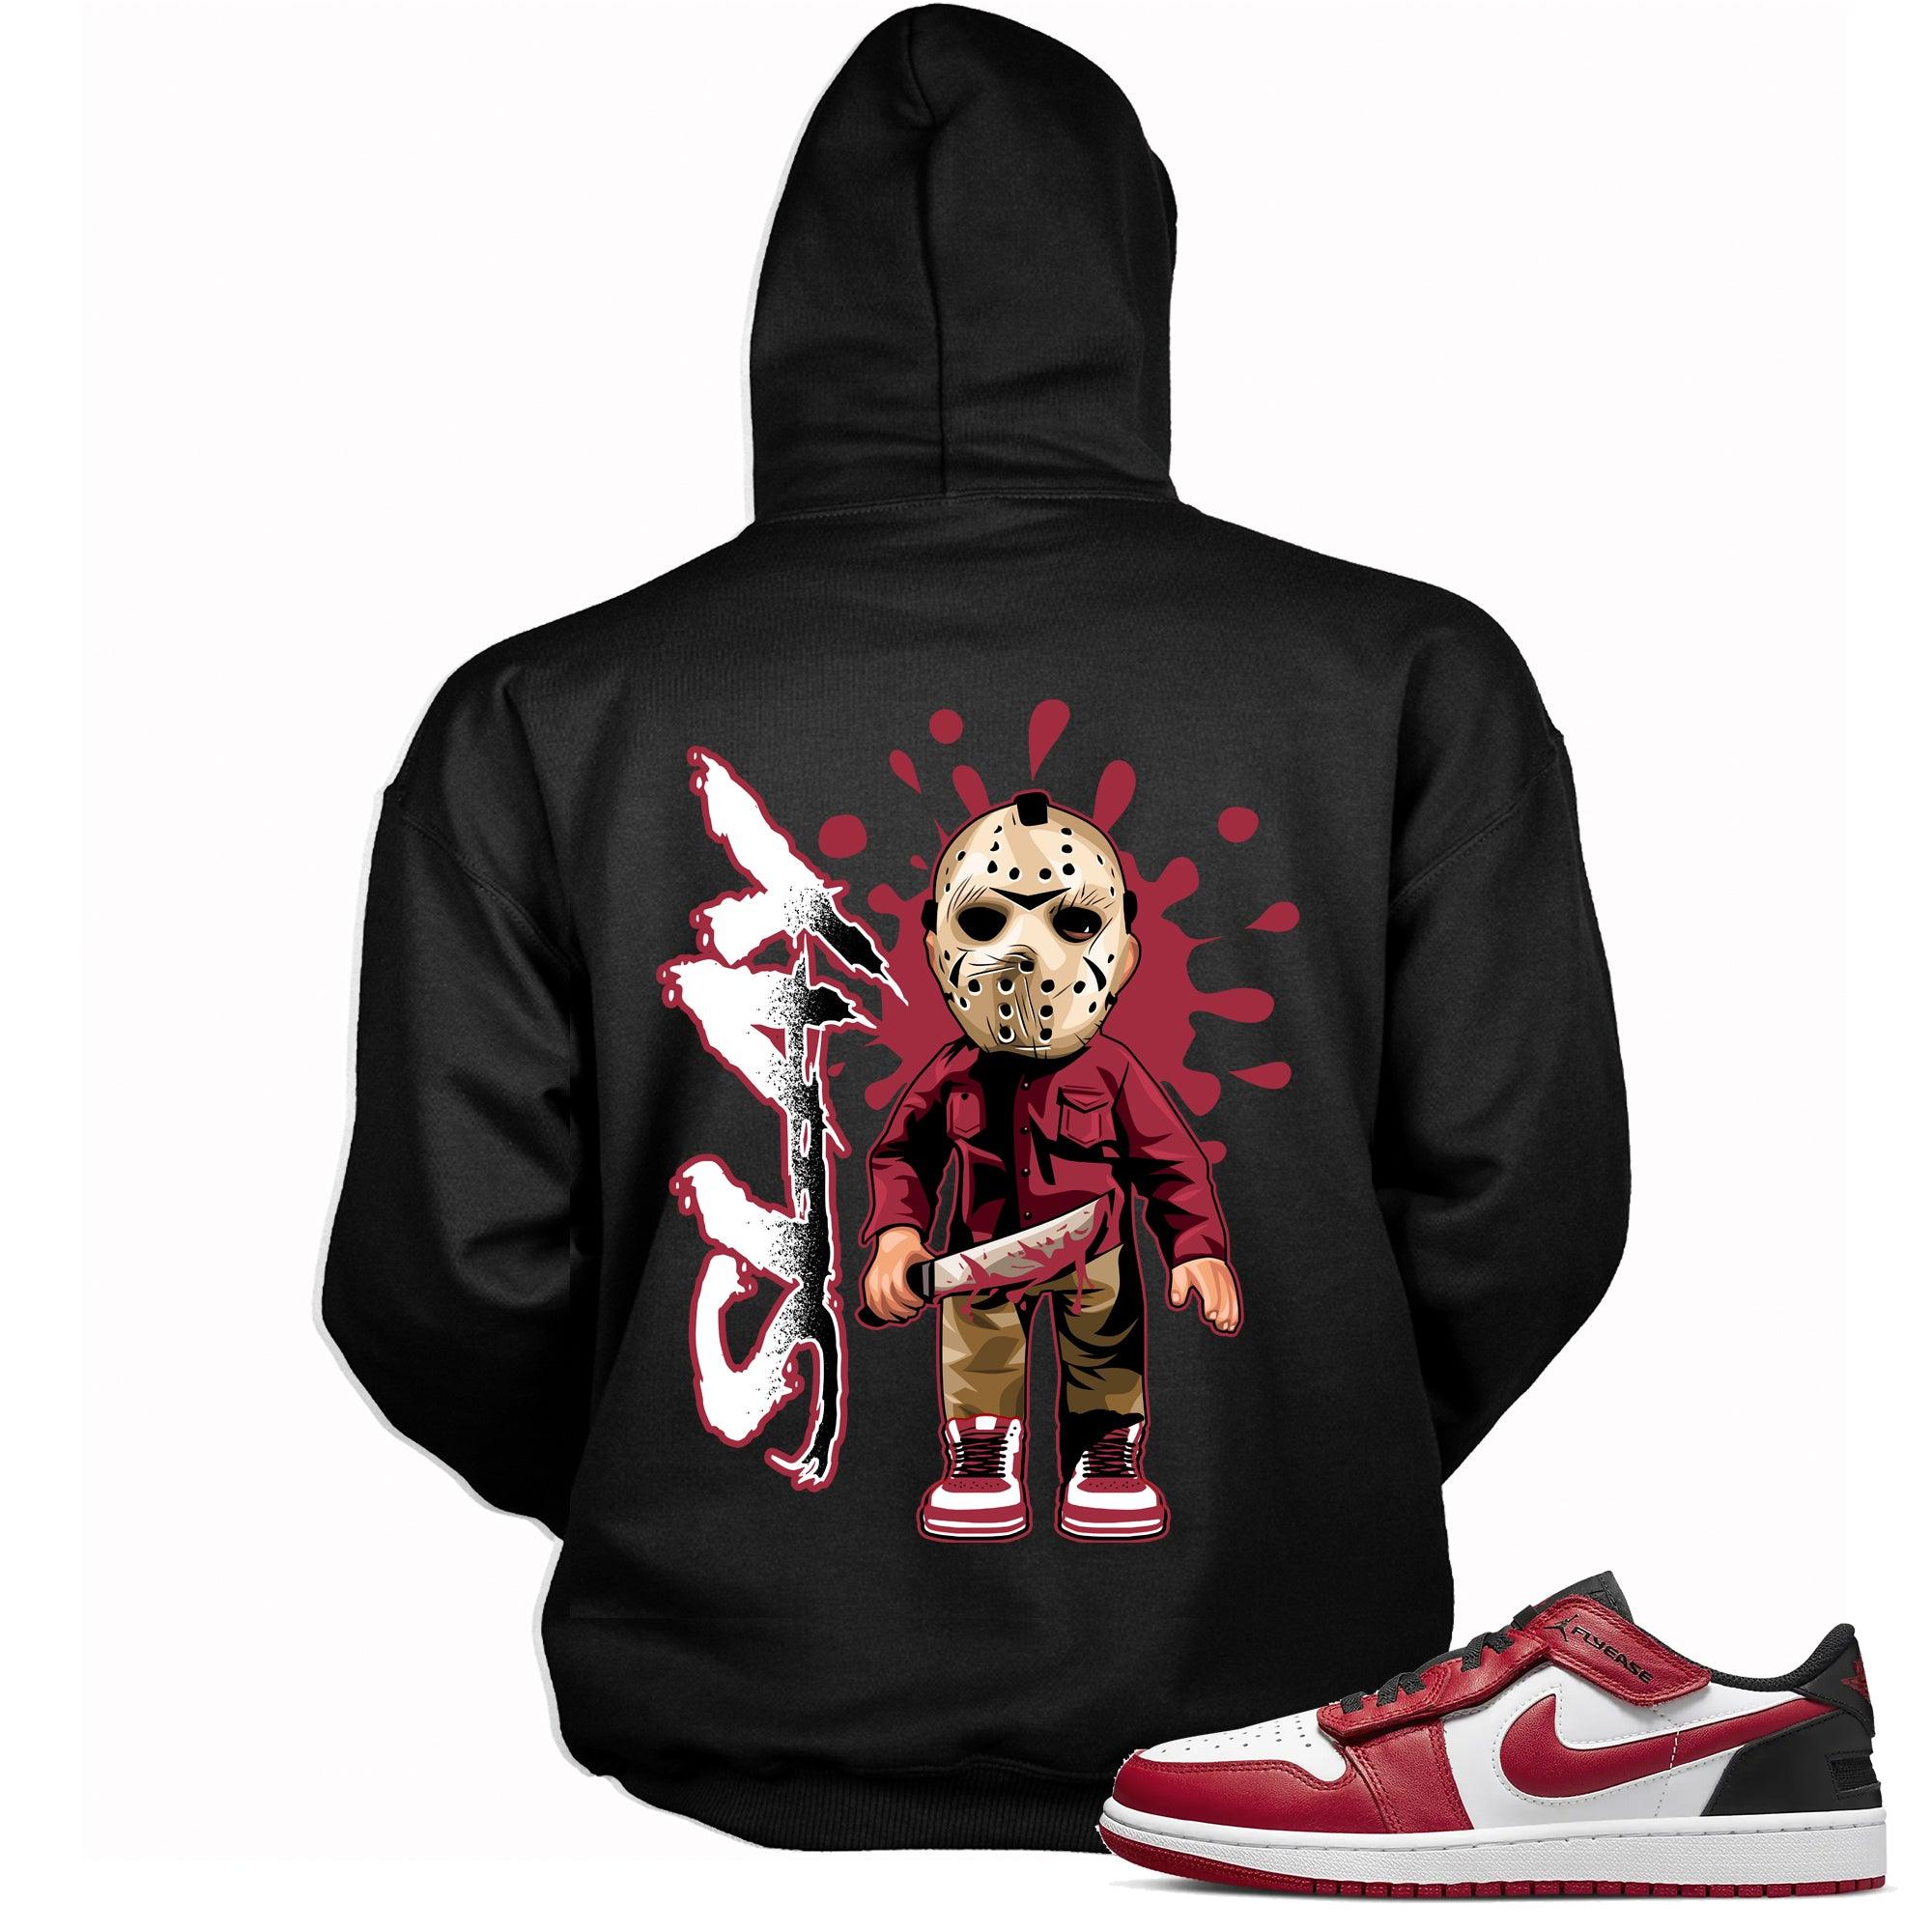 Black Friday the 13th Sweatshirt for AJ 1 Low FlyEase photo